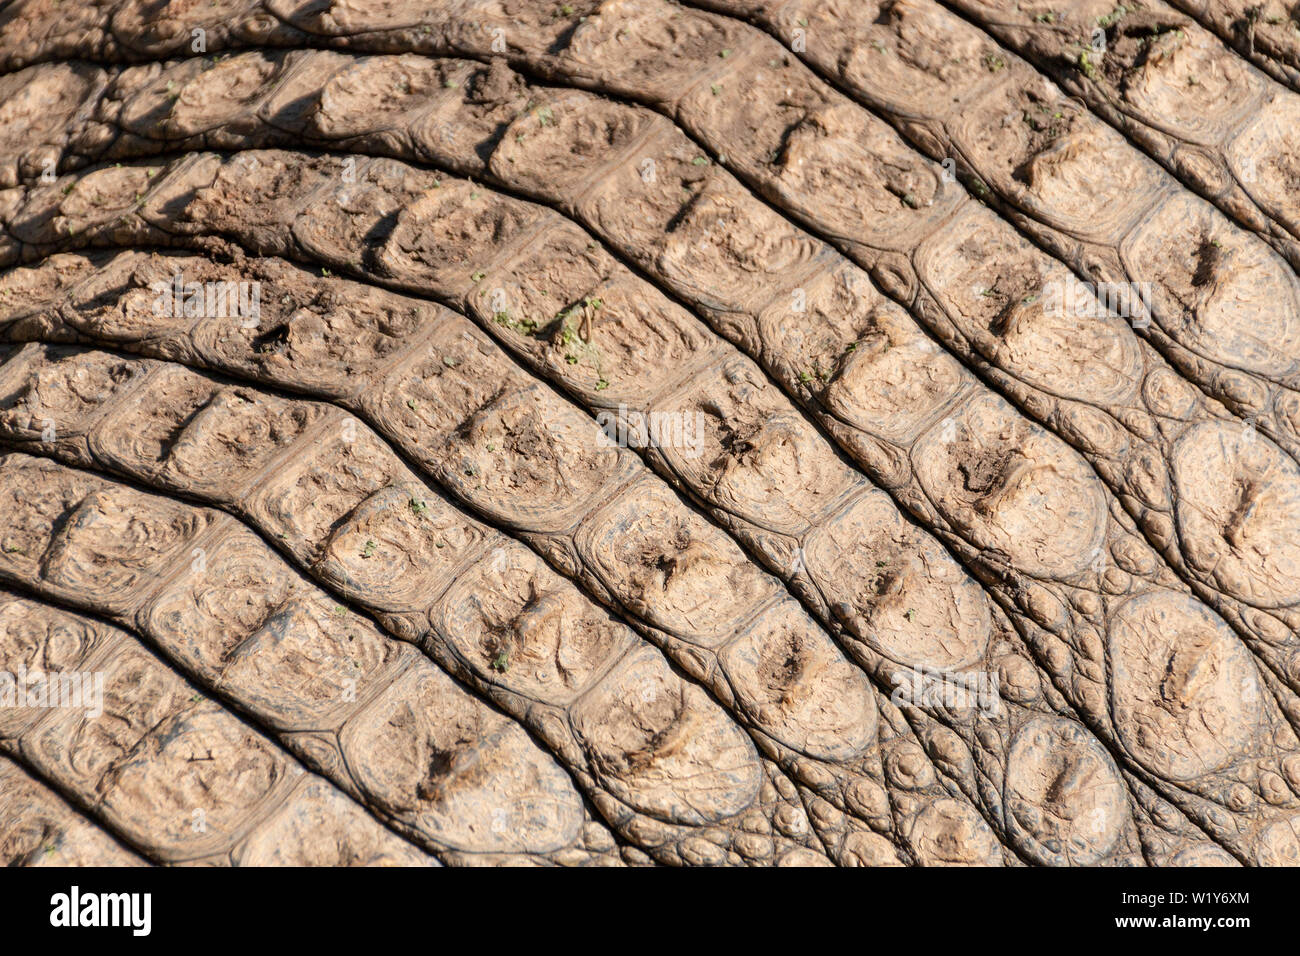 A close up view of the scales on the back of a crocodile Stock Photo